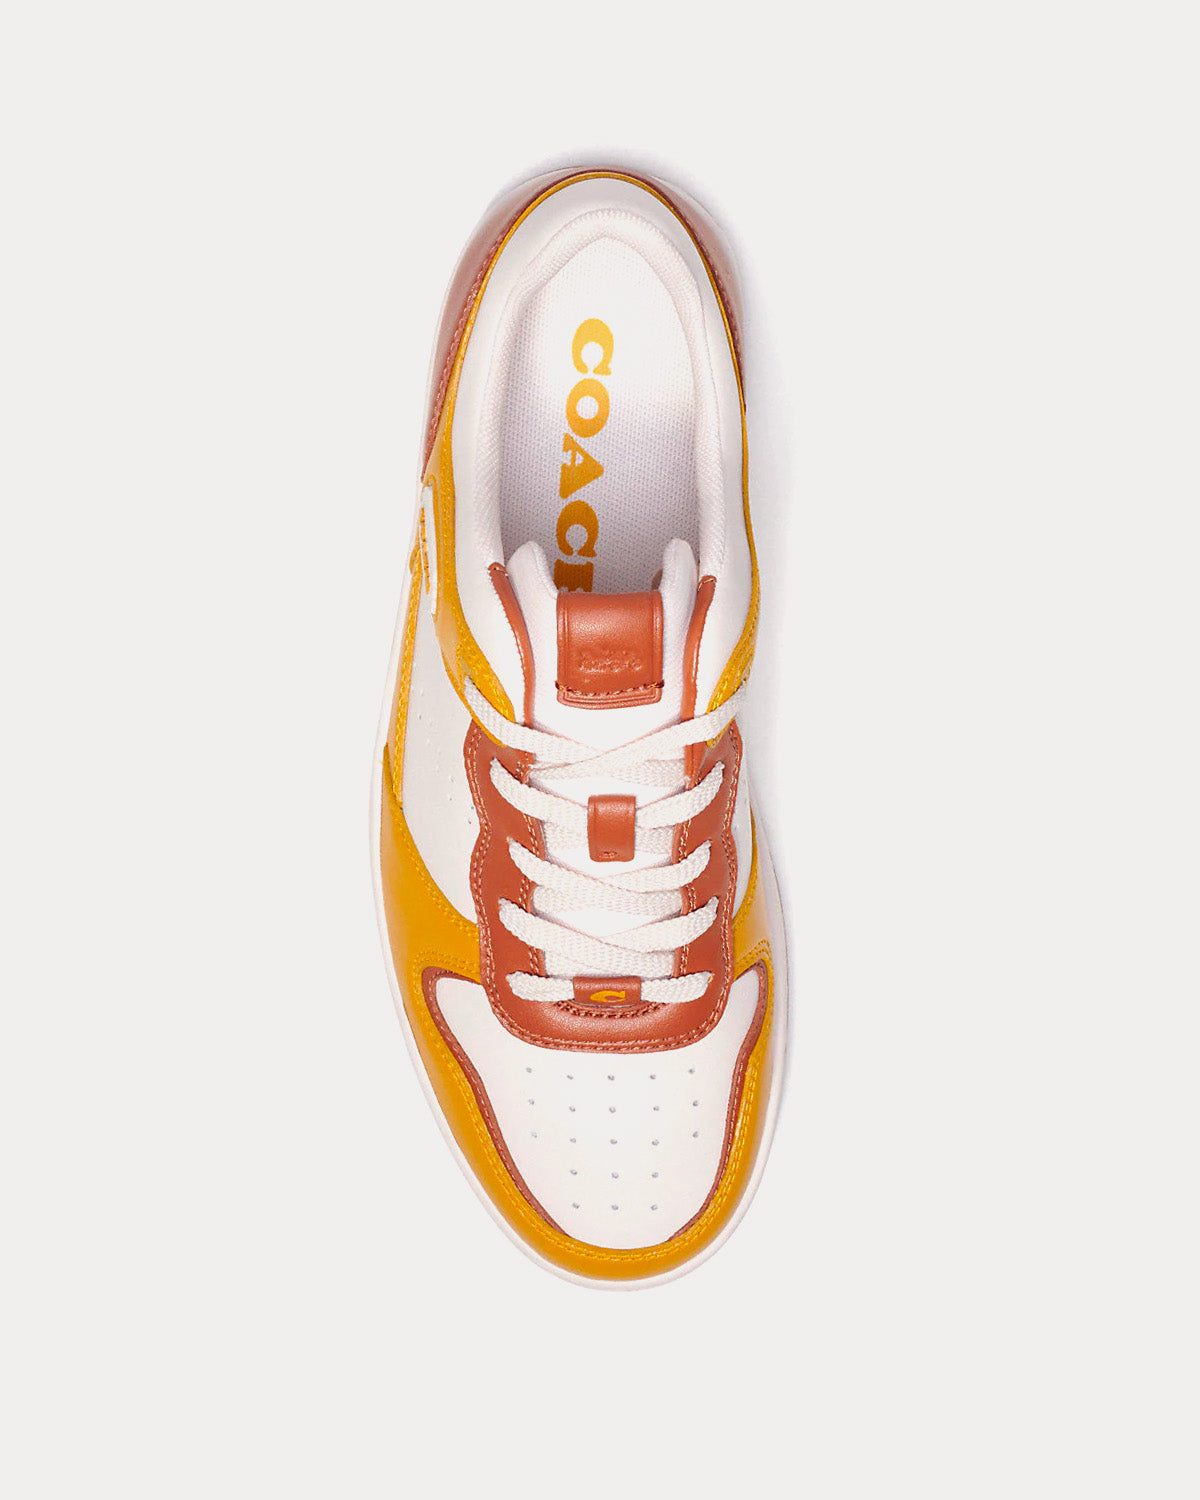 Coach - C201 Yellow Gold Low Top Sneakers